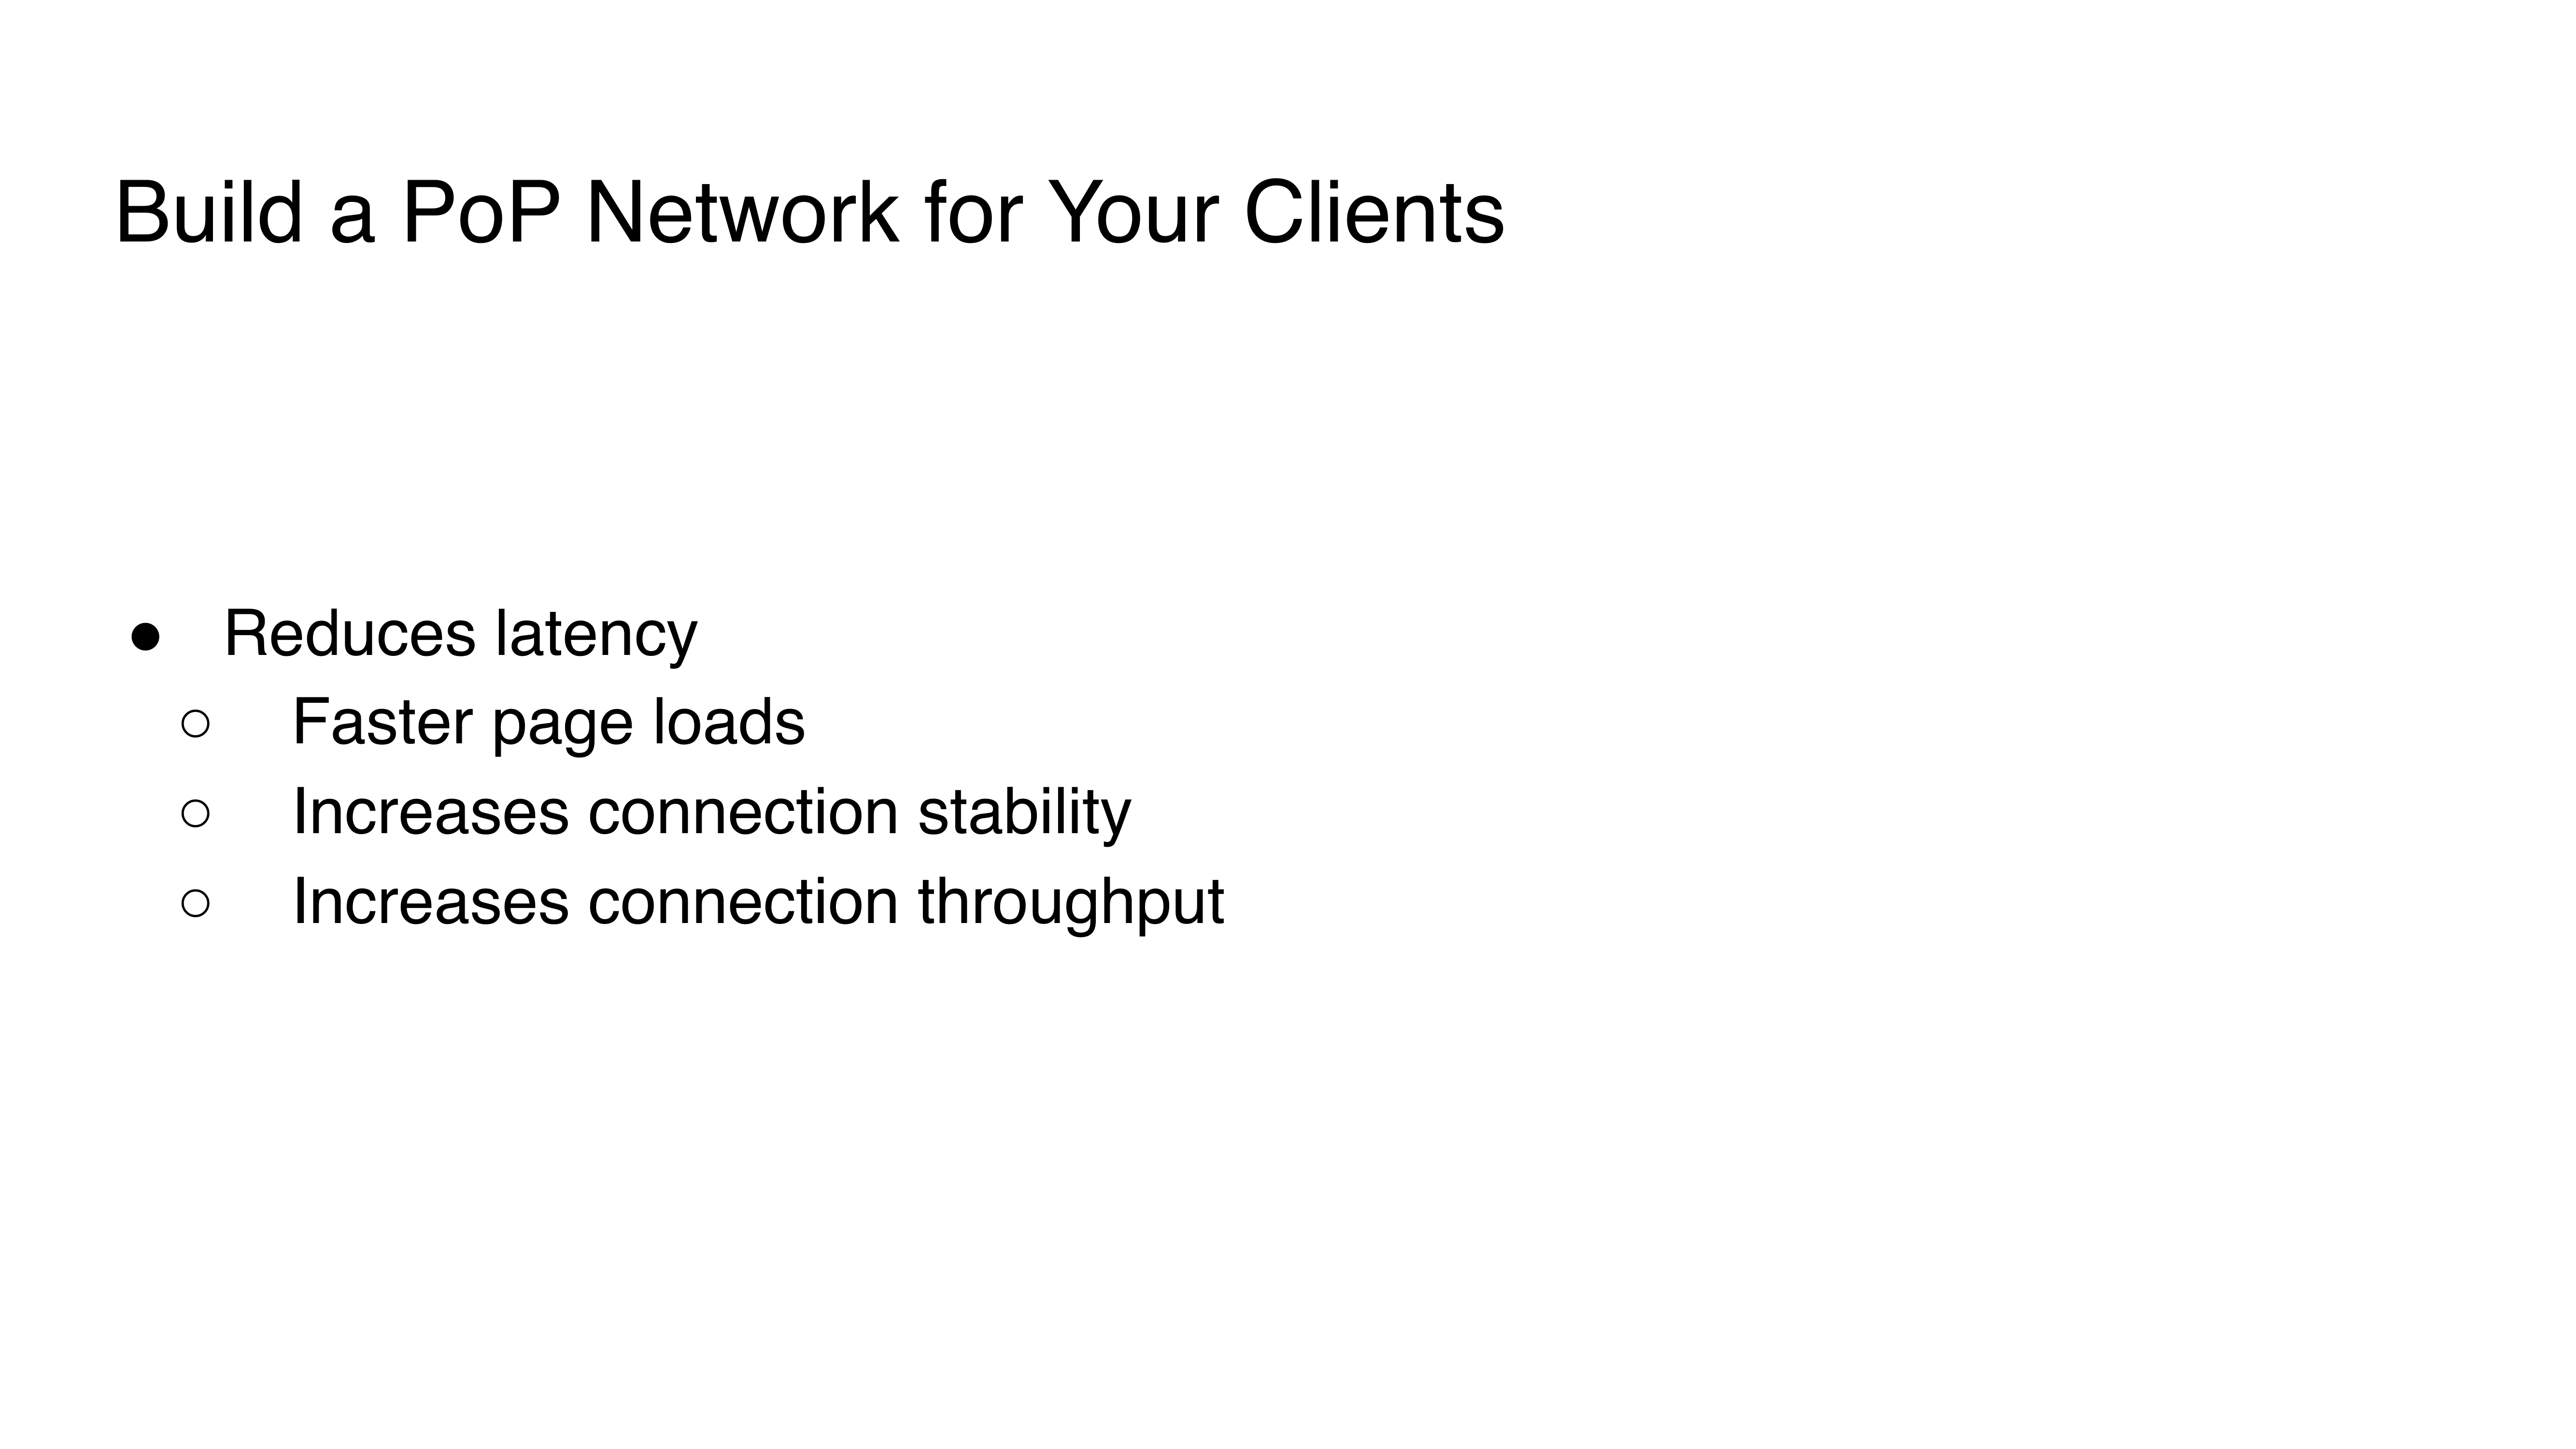 6.-build-a-pop-network-for-your-clients_reduces-latency